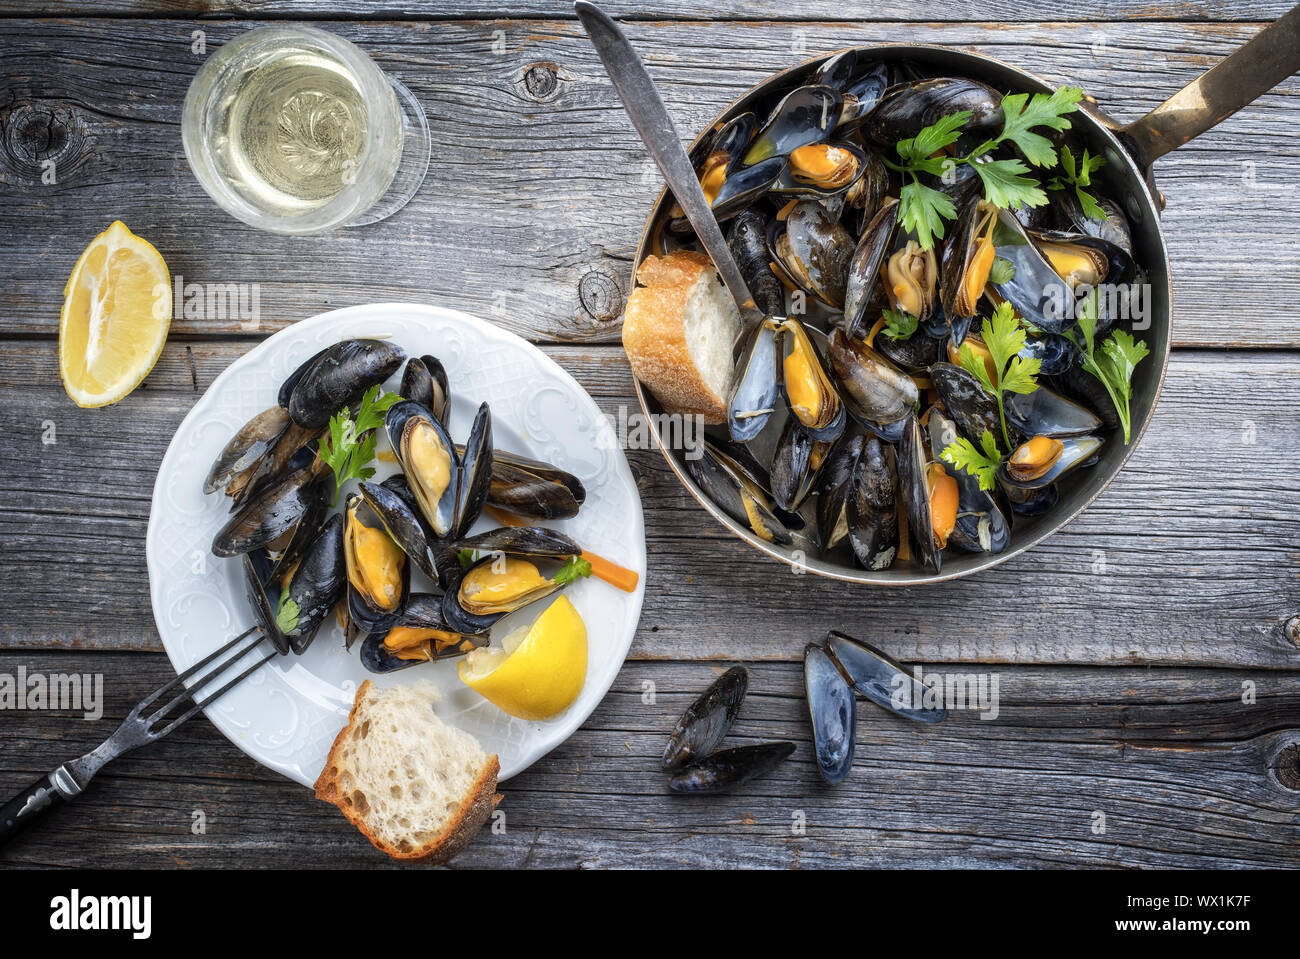 Traditional barbecue Italian blue mussel in white wine as top view in a casserole Stock Photo